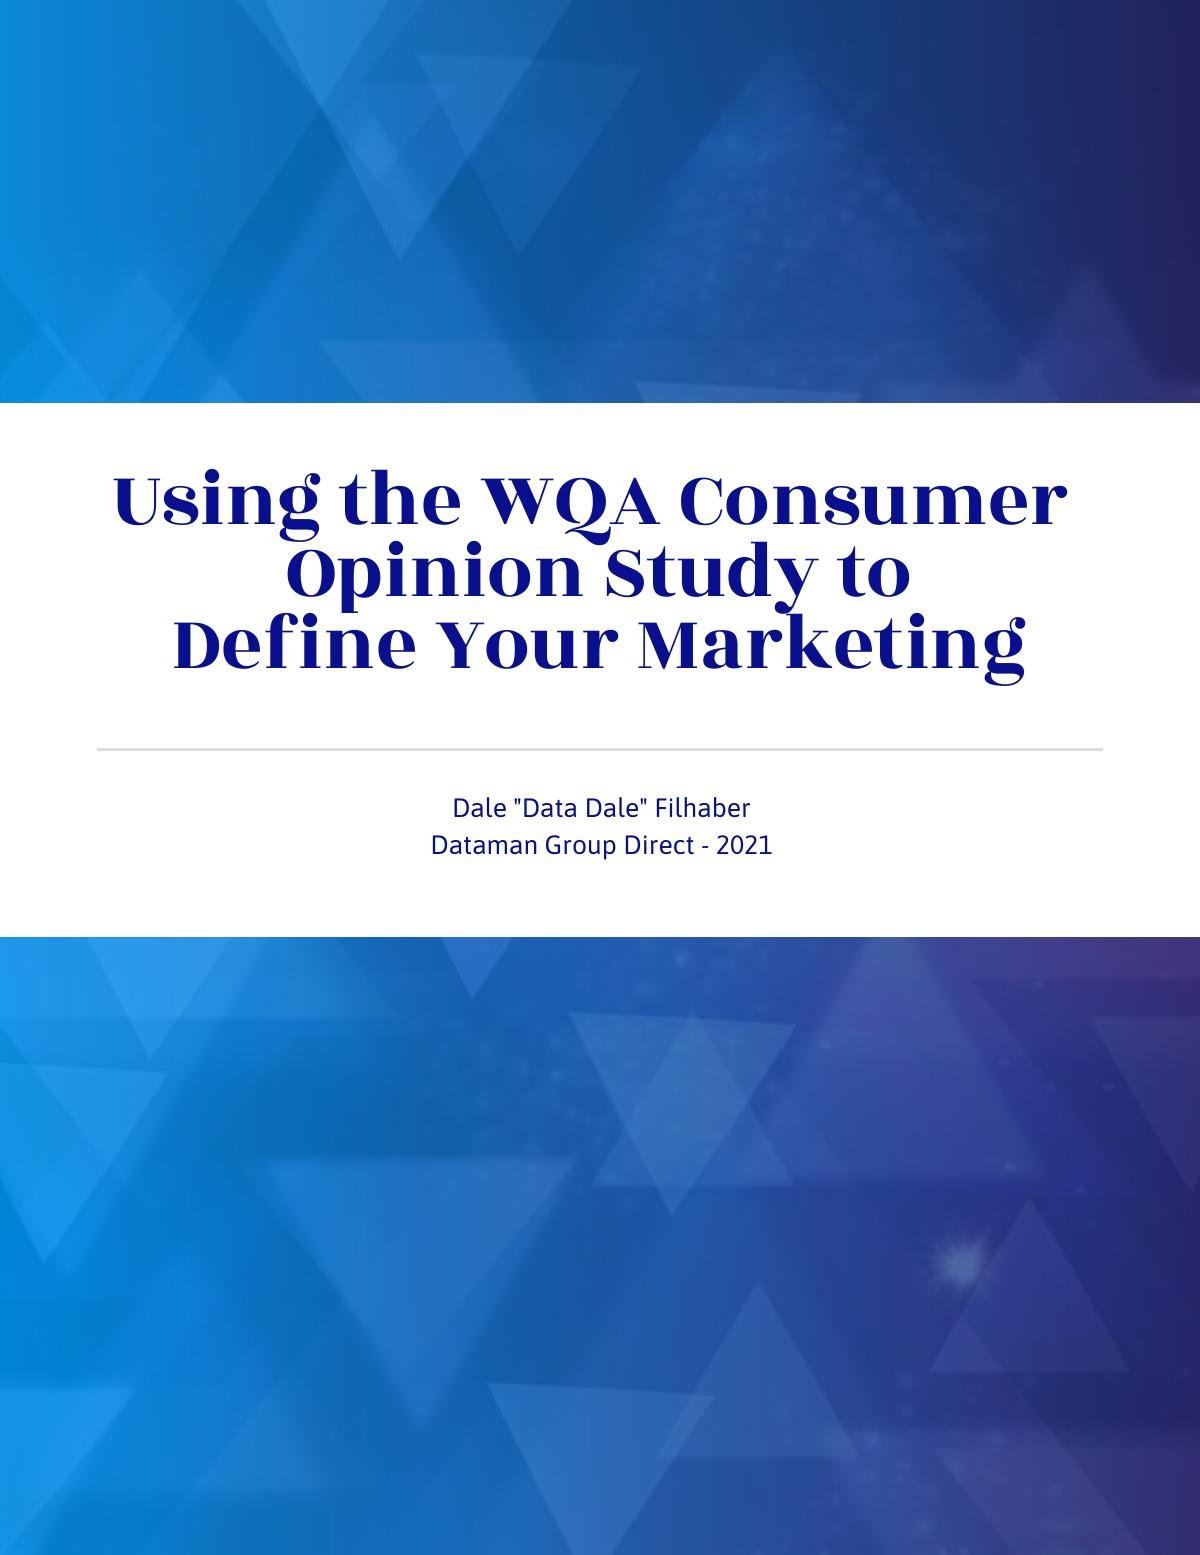 Using WQA Consumer Research to Define Marketing Strategy